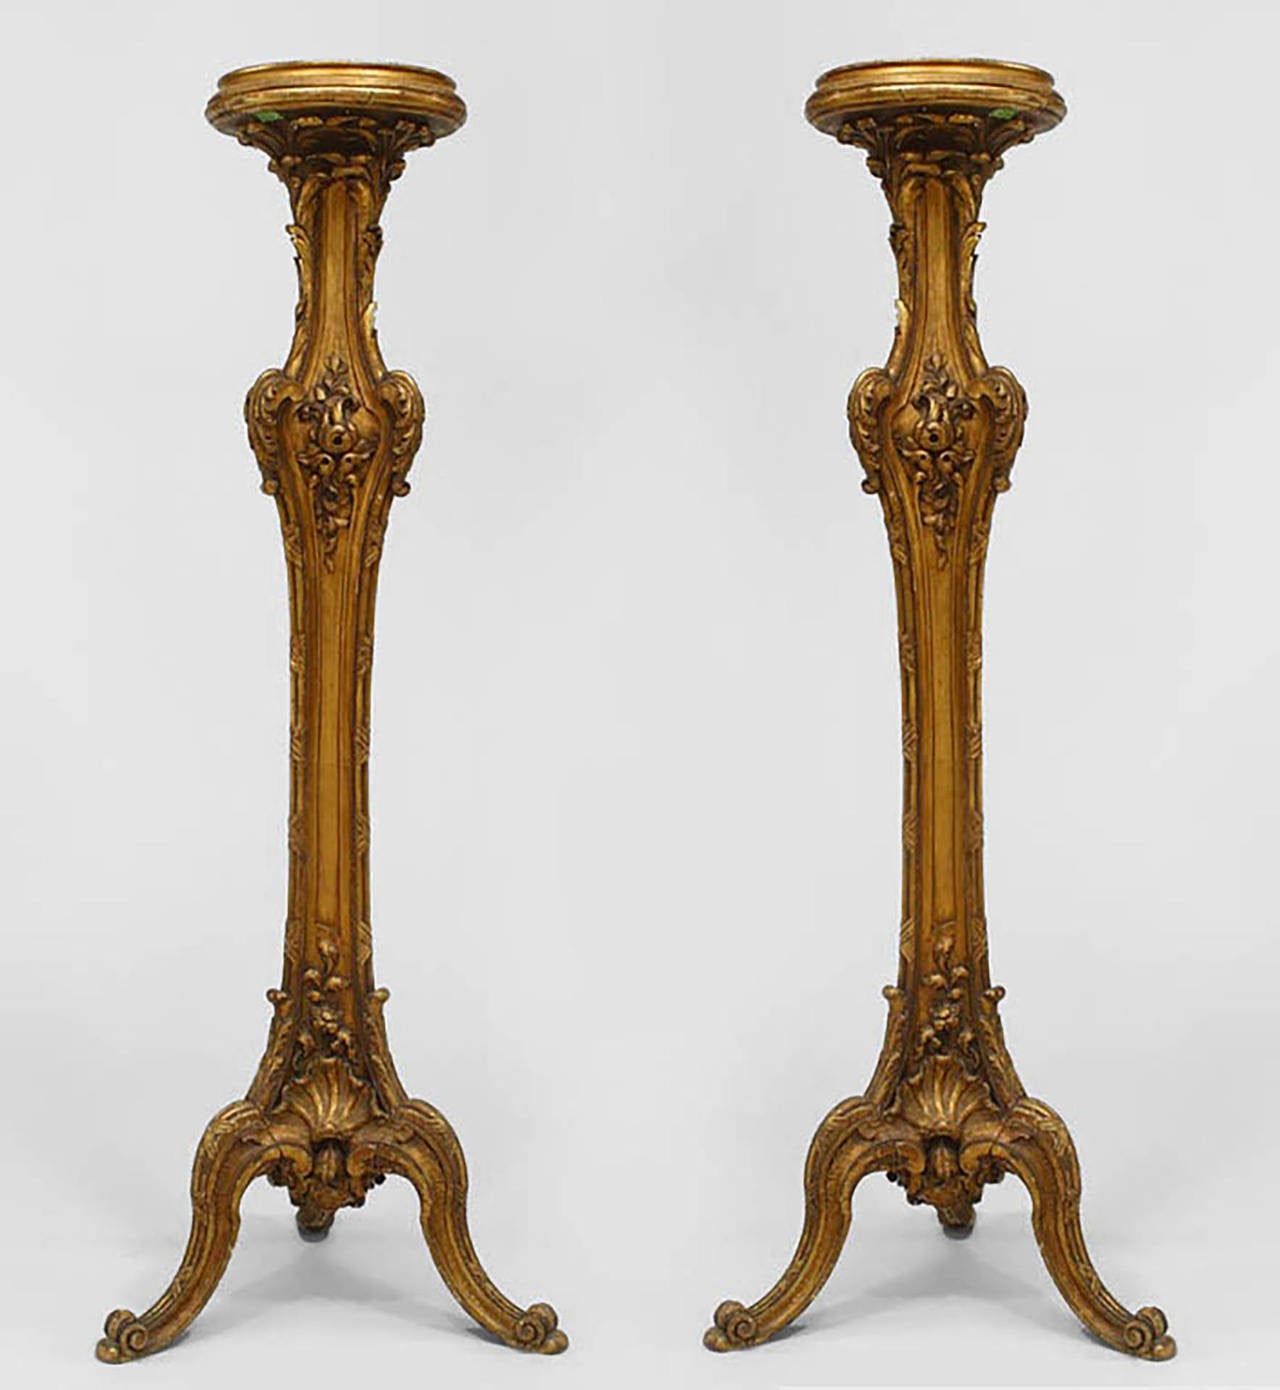 Pair of French Louis XV style (19th Cent) gilt pedestals with 3 legs at base.
